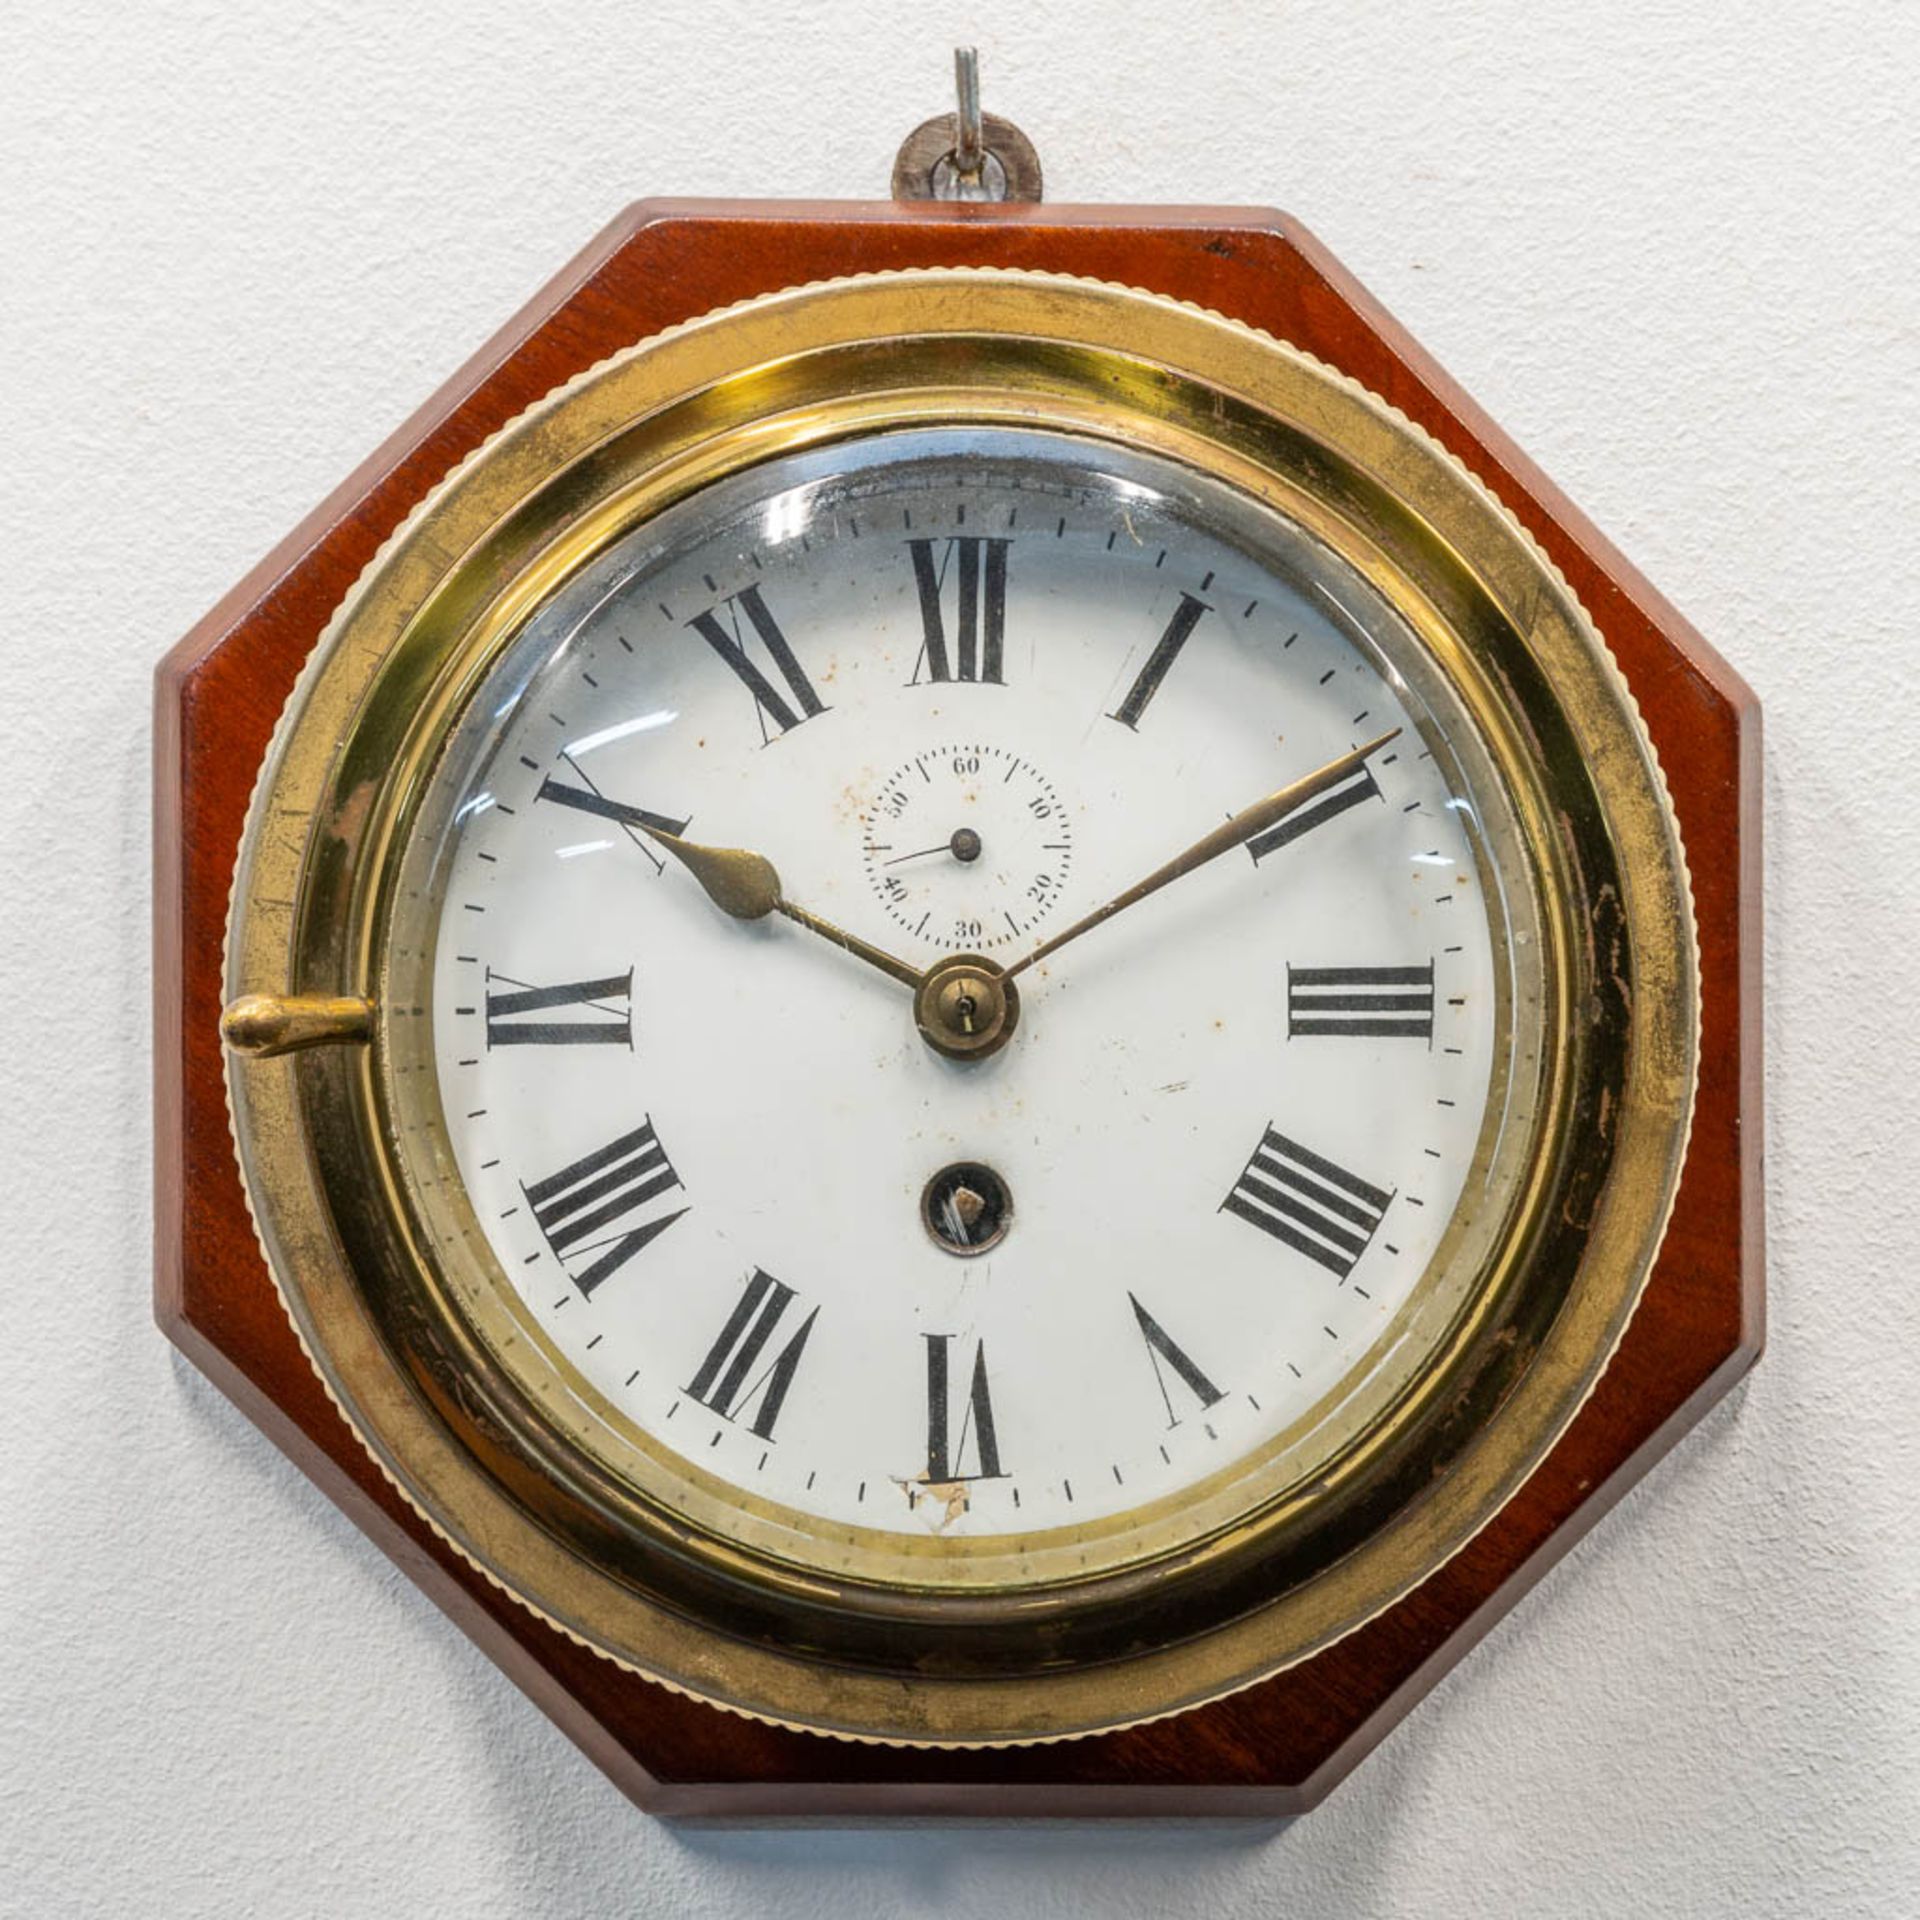 A ship clock mounted on wood, the first half of the 20th century. (9 x 20 cm)